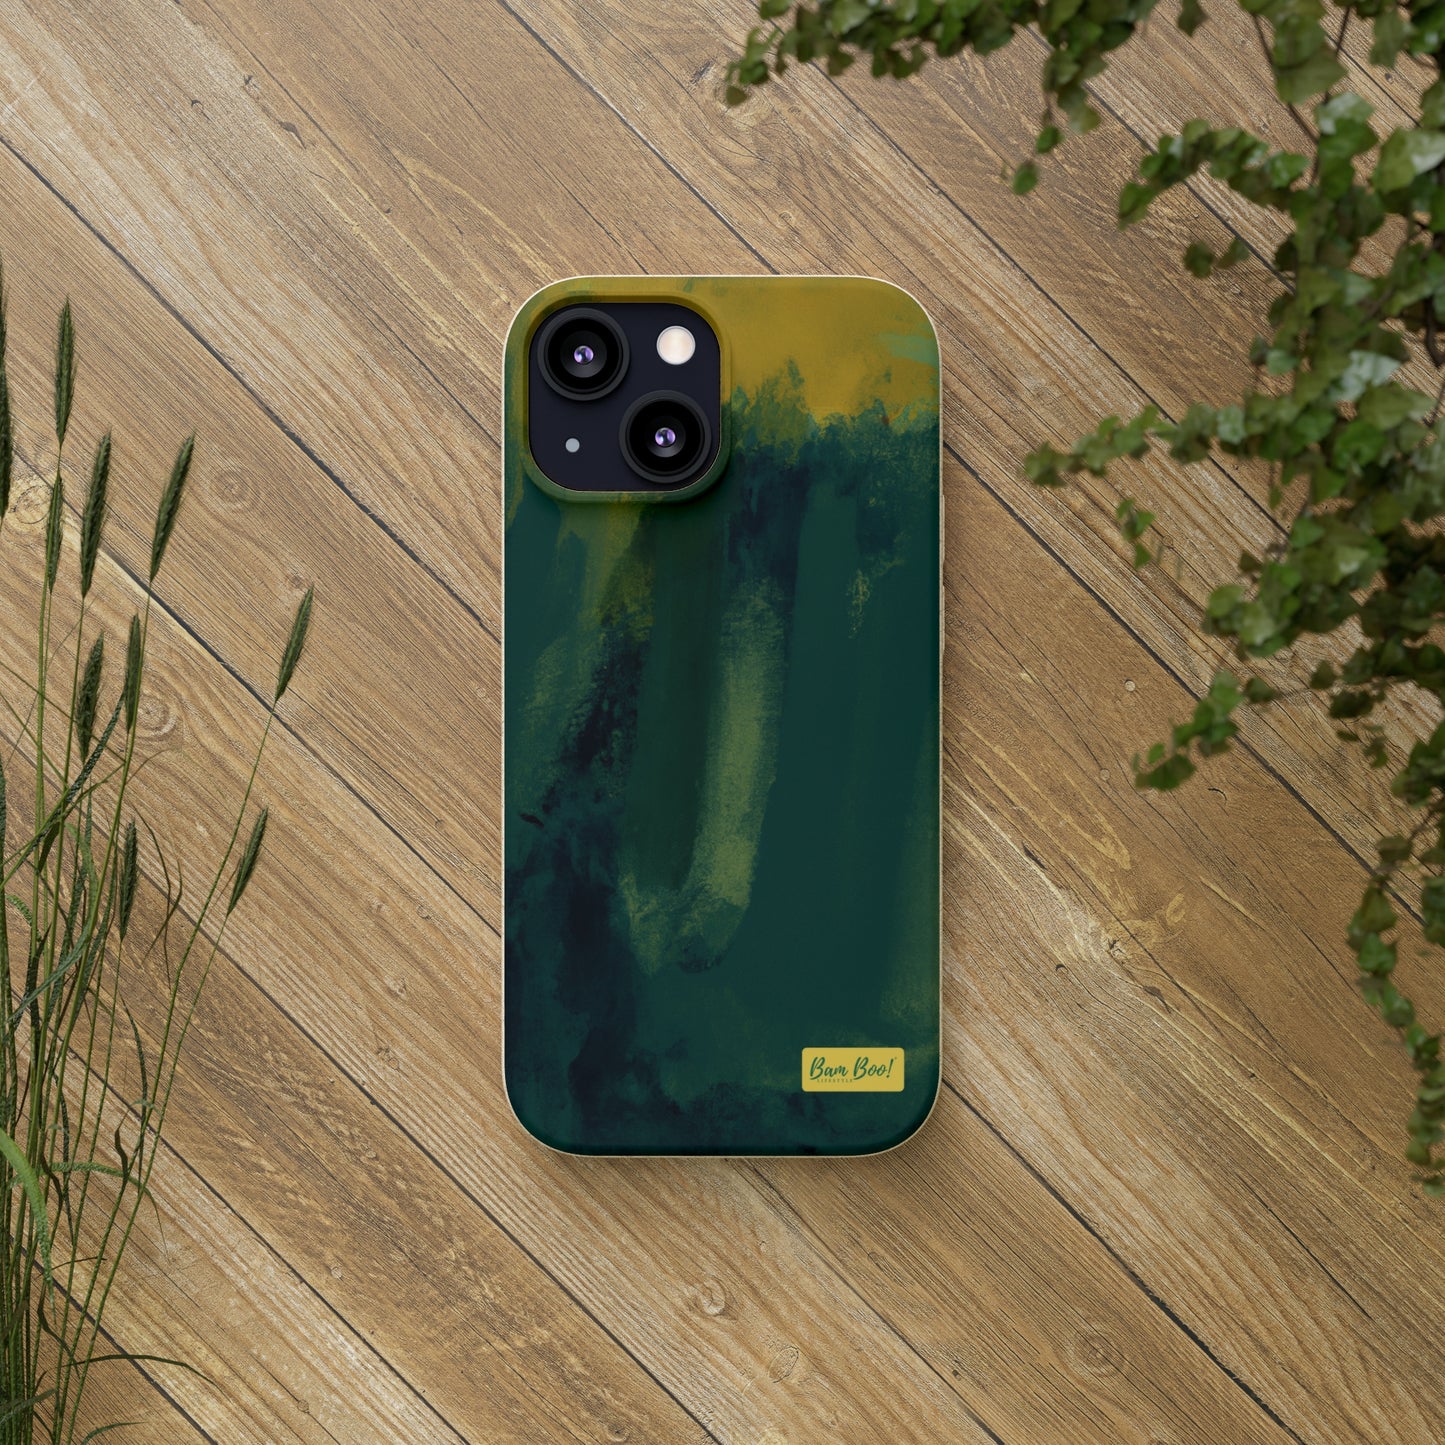 "Mixing Dreams: A Textured Abstract Landscape" - Bam Boo! Lifestyle Eco-friendly Cases